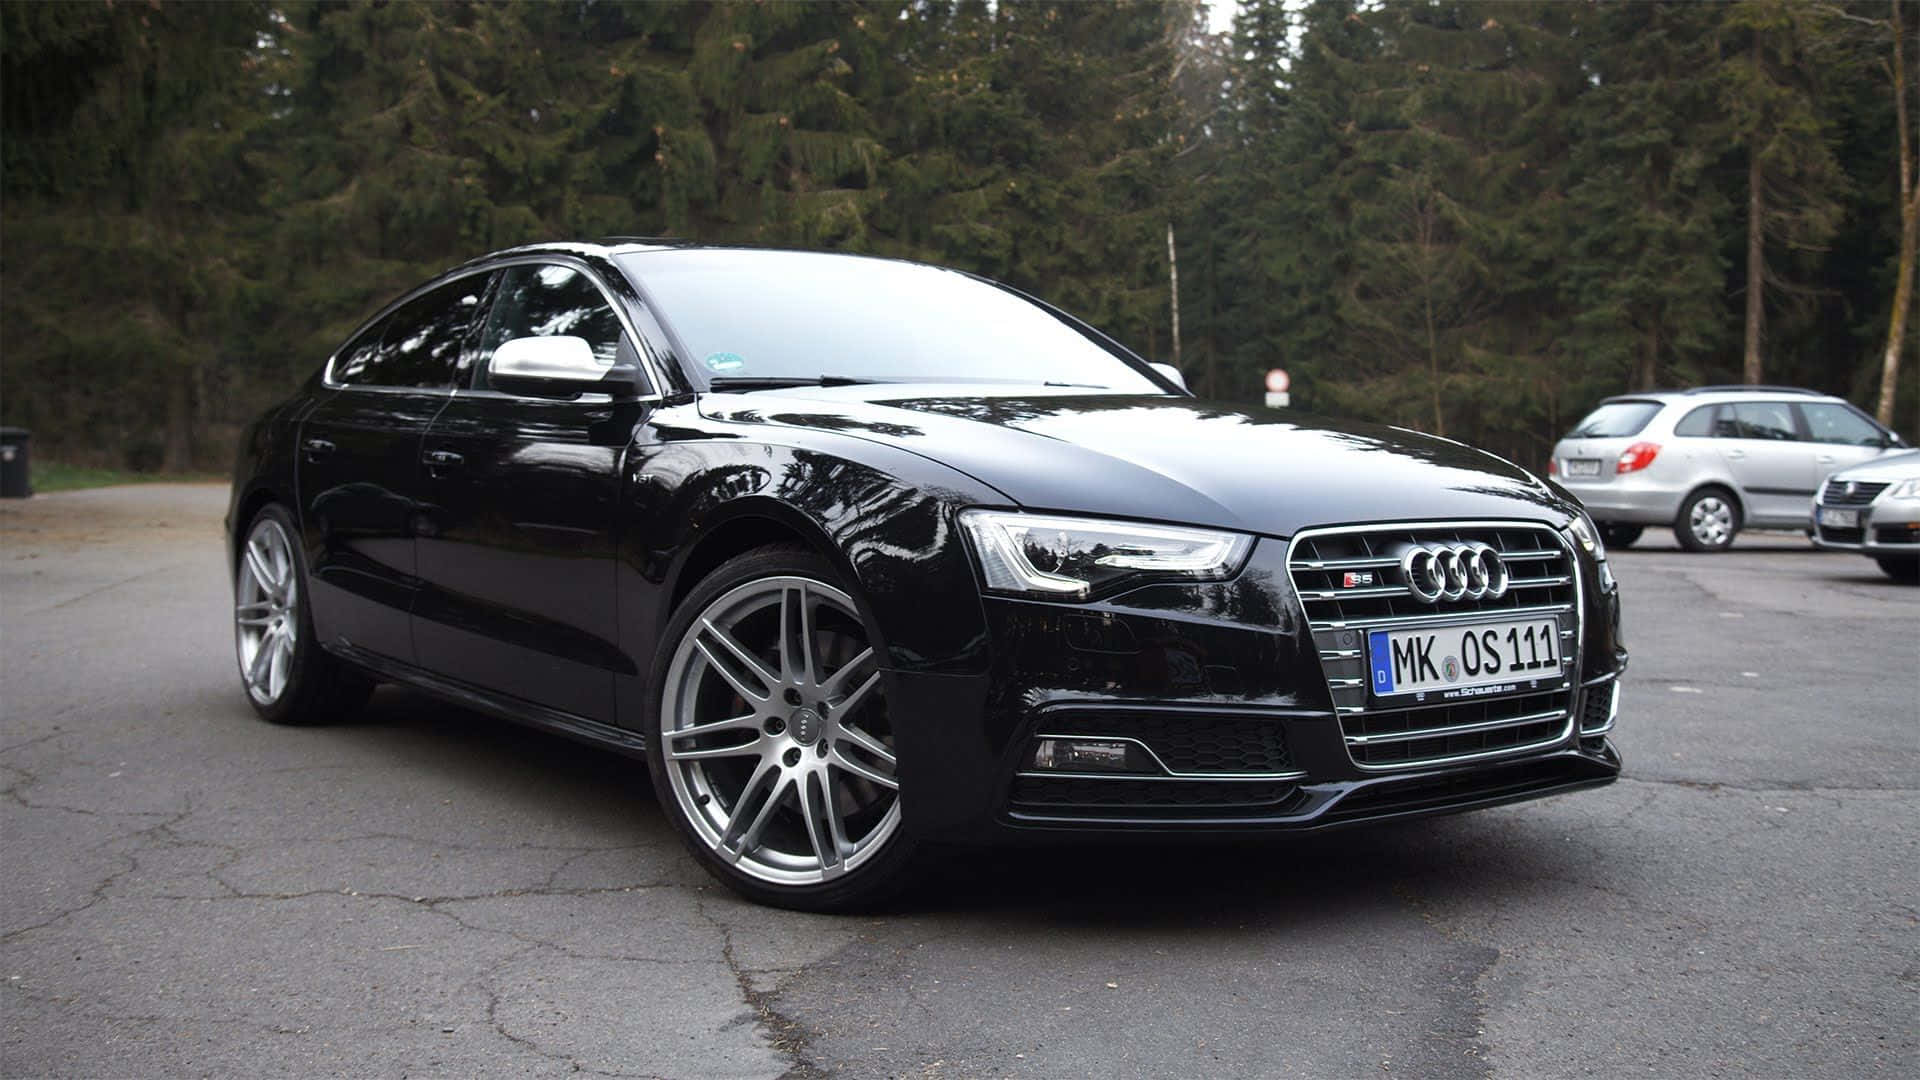 Luxurious Audi S6 in Motion Wallpaper